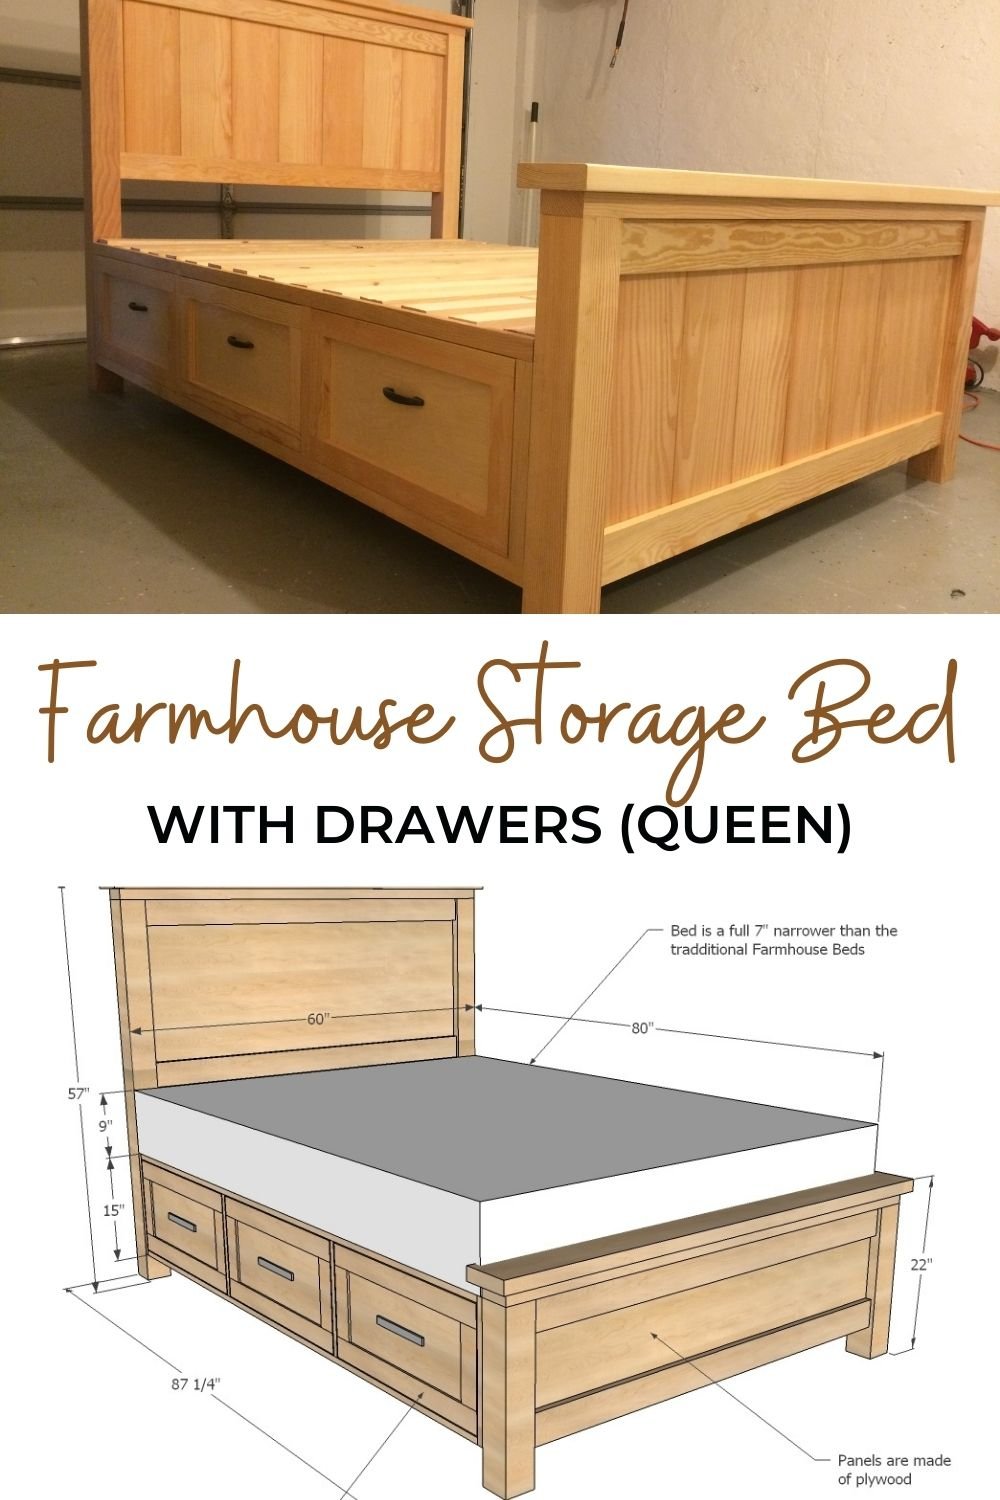 Farmhouse Storage Bed With Drawers, Build Your Own Bed Frame Plans